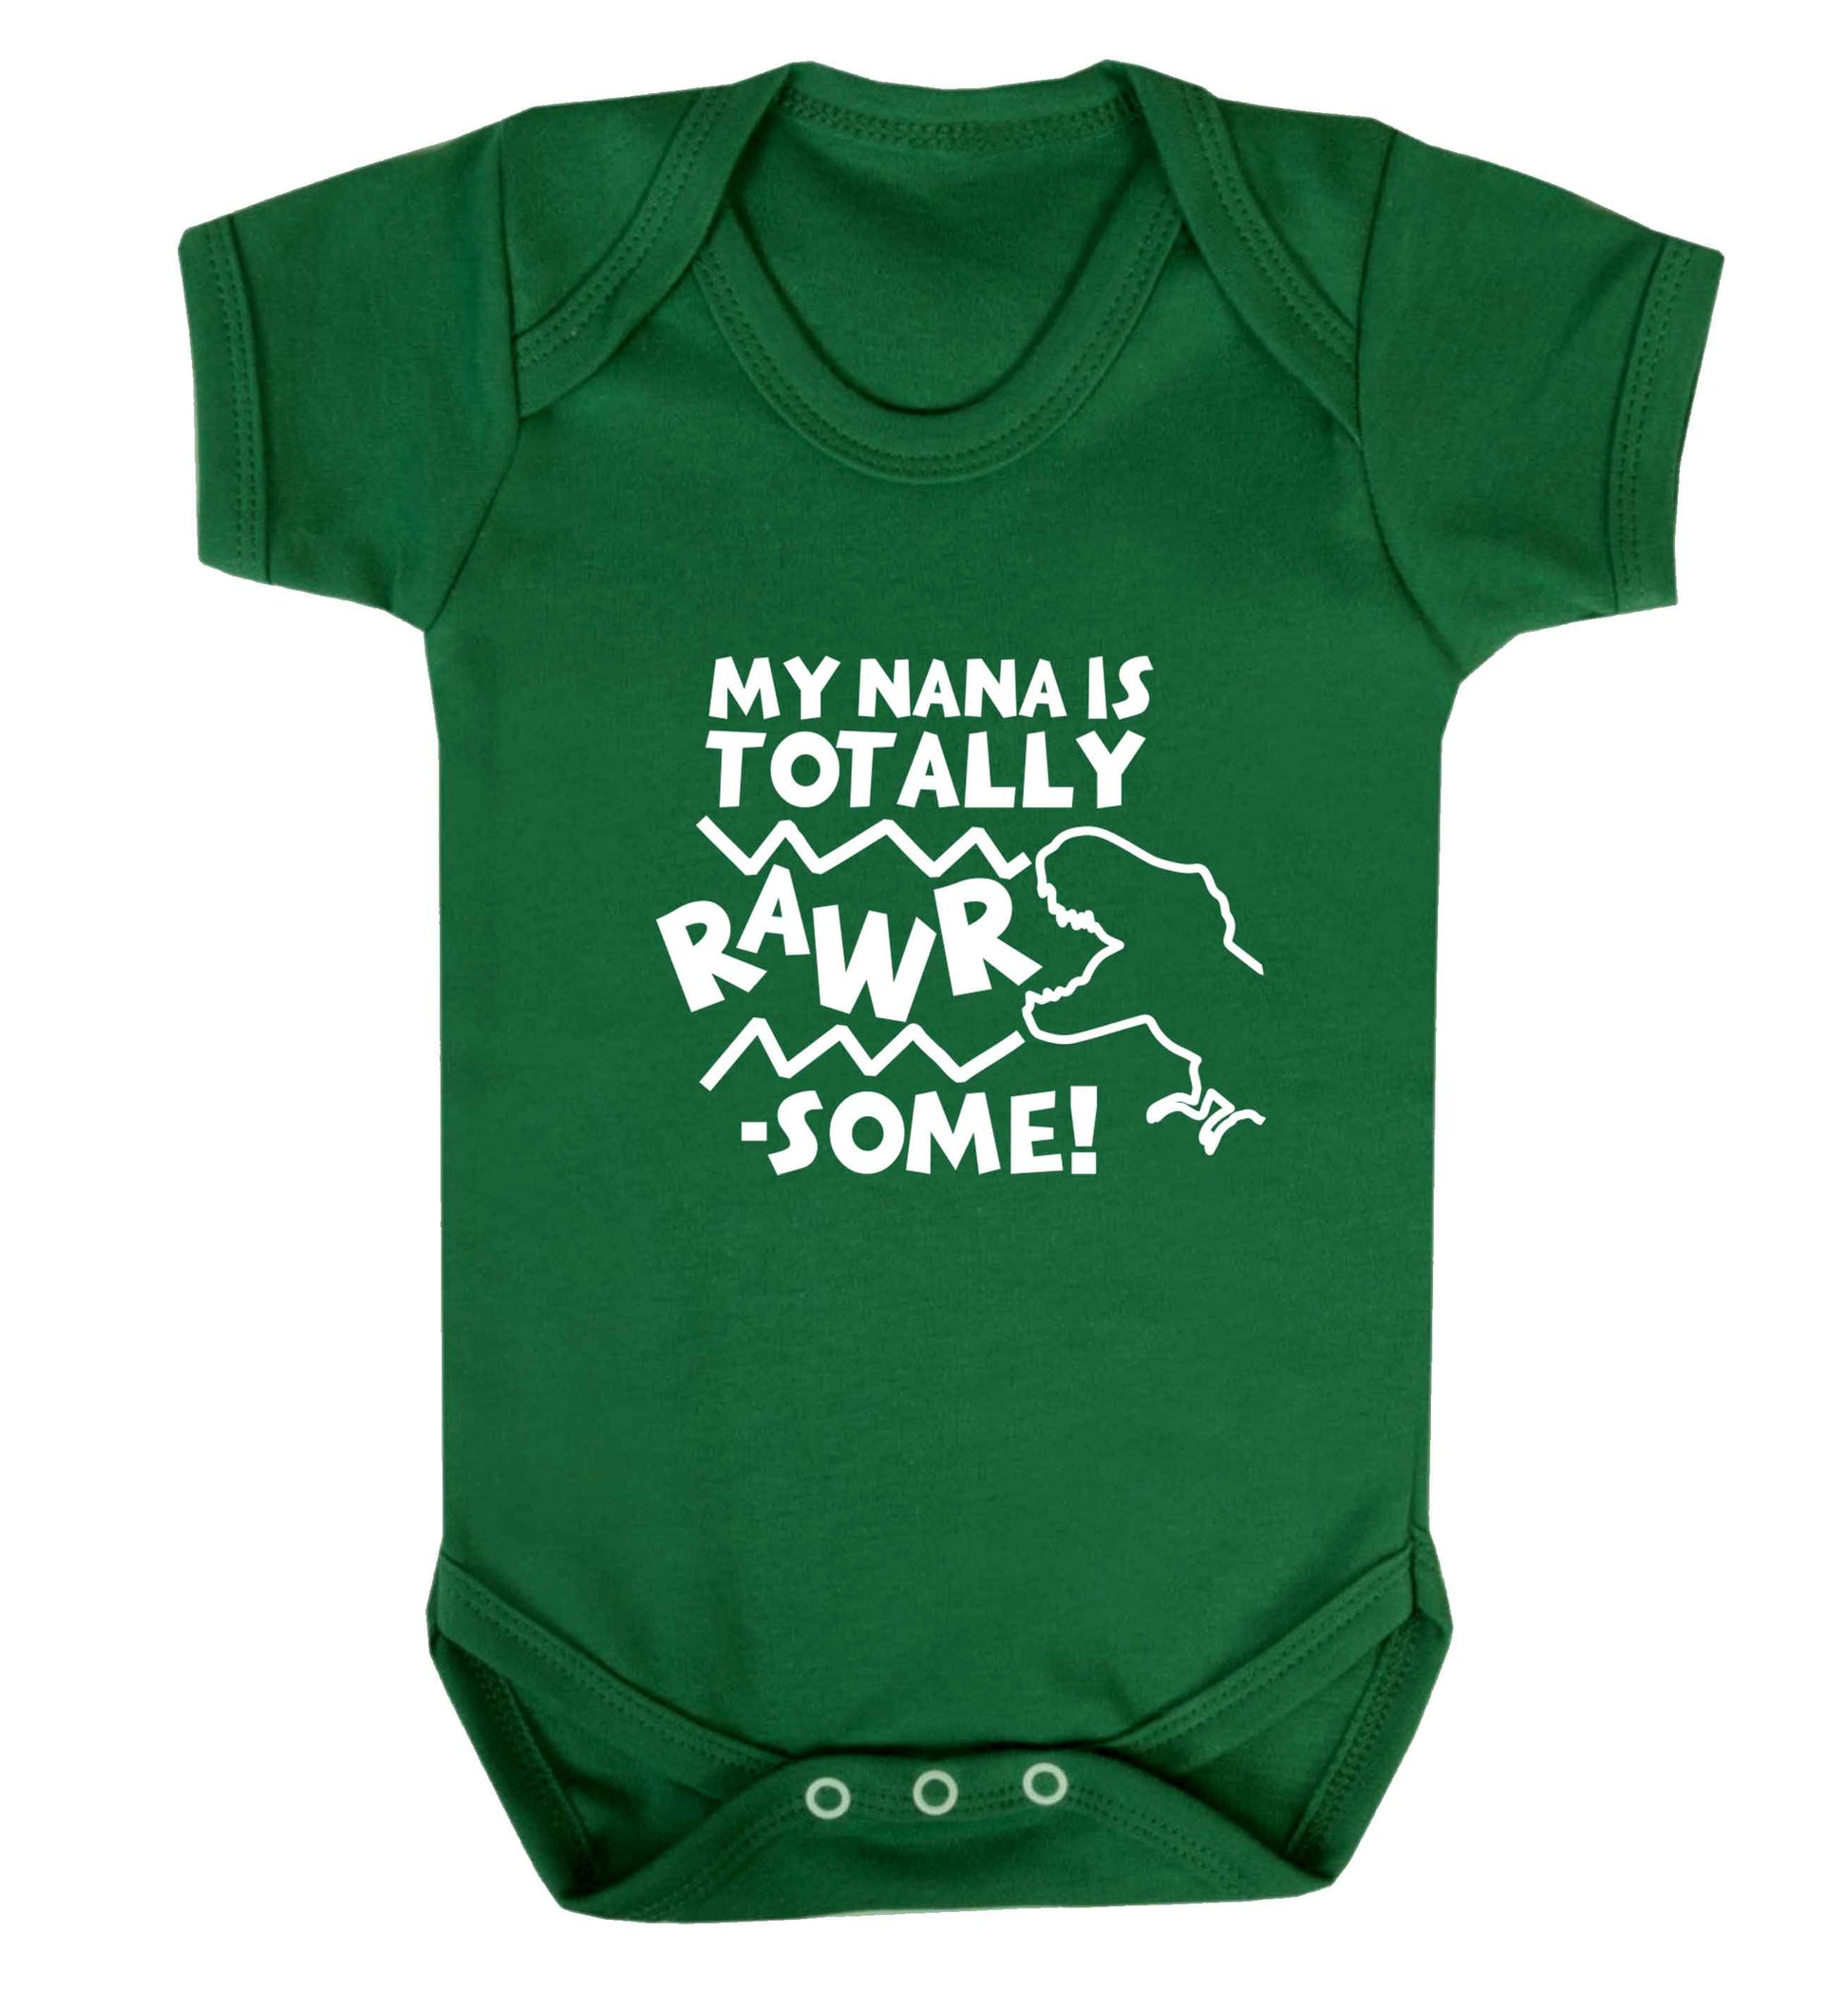 My nana is totally rawrsome baby vest green 18-24 months